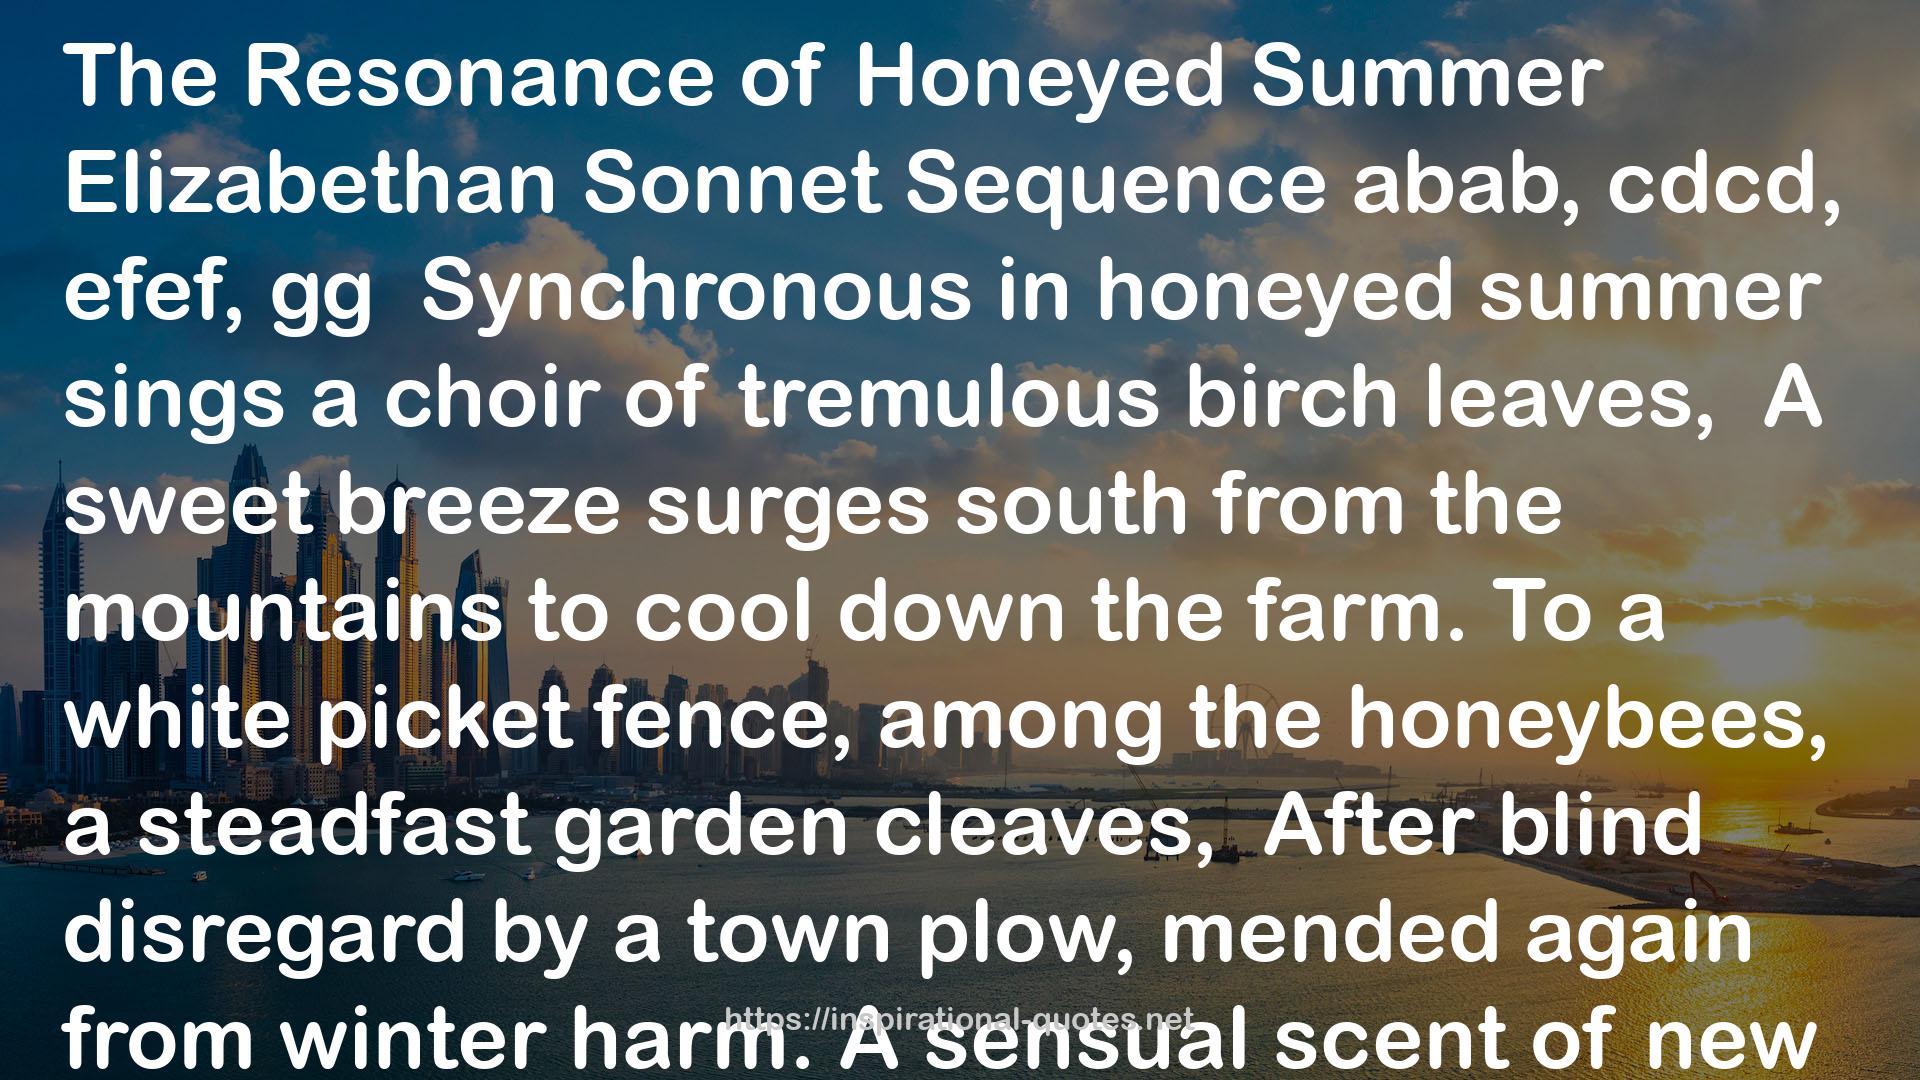 Sonnets on the Common Man: New Hampshire Verse QUOTES